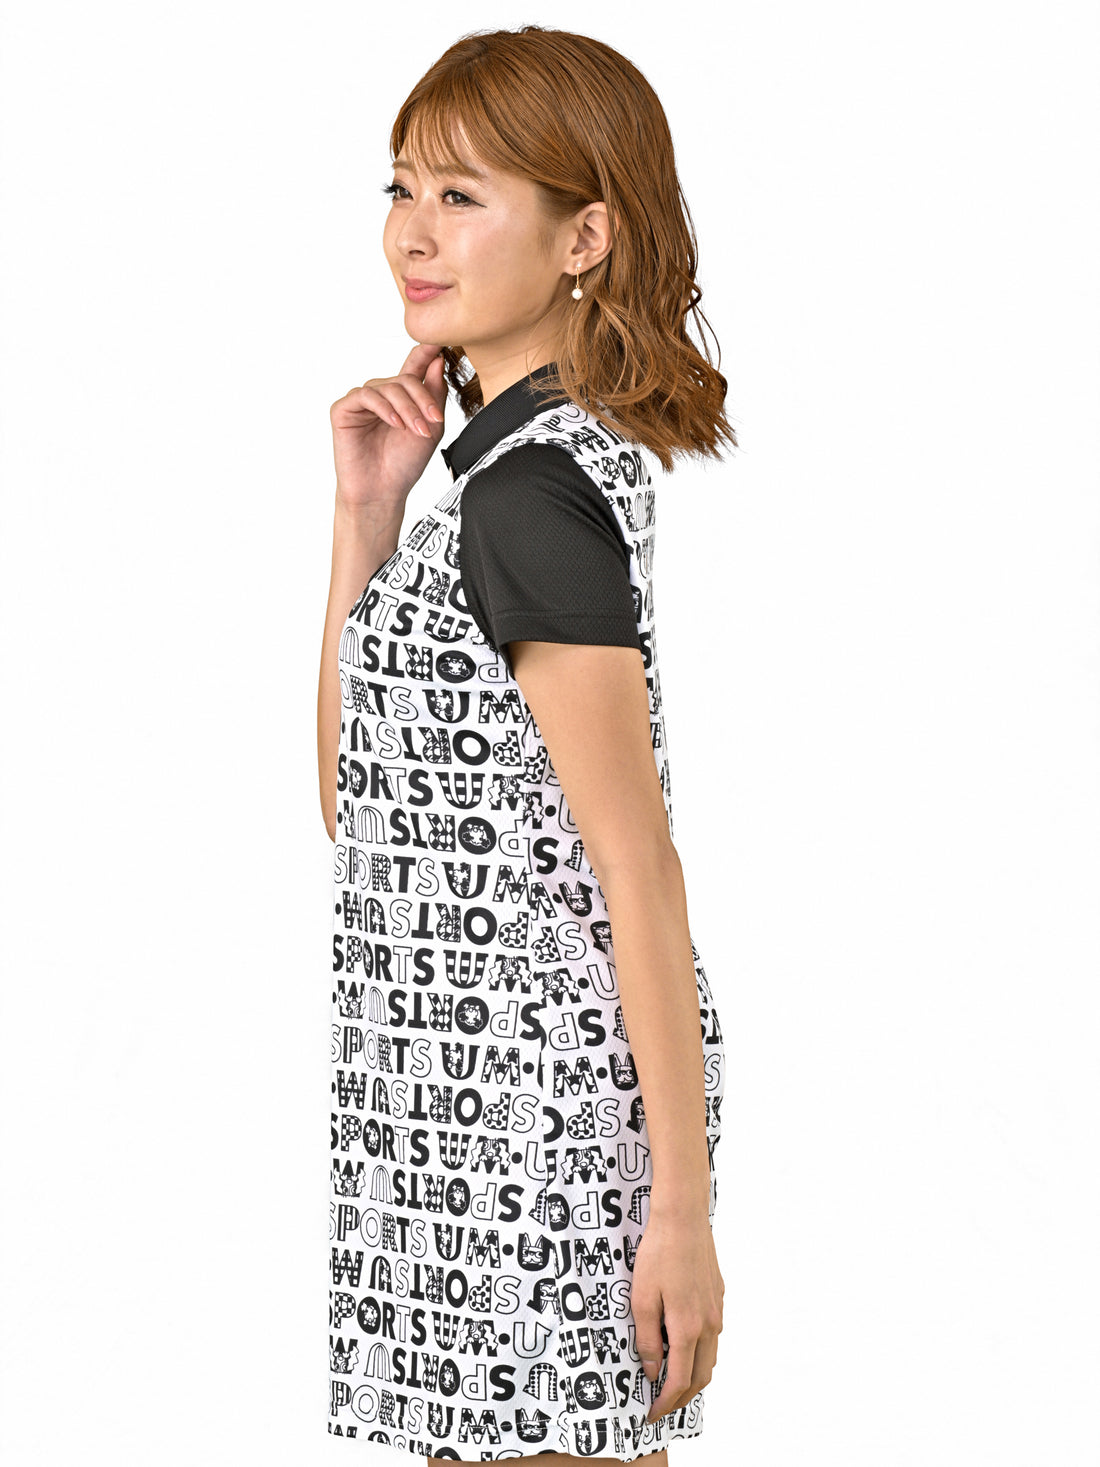 All-over logo print polow one piece (701J6008)